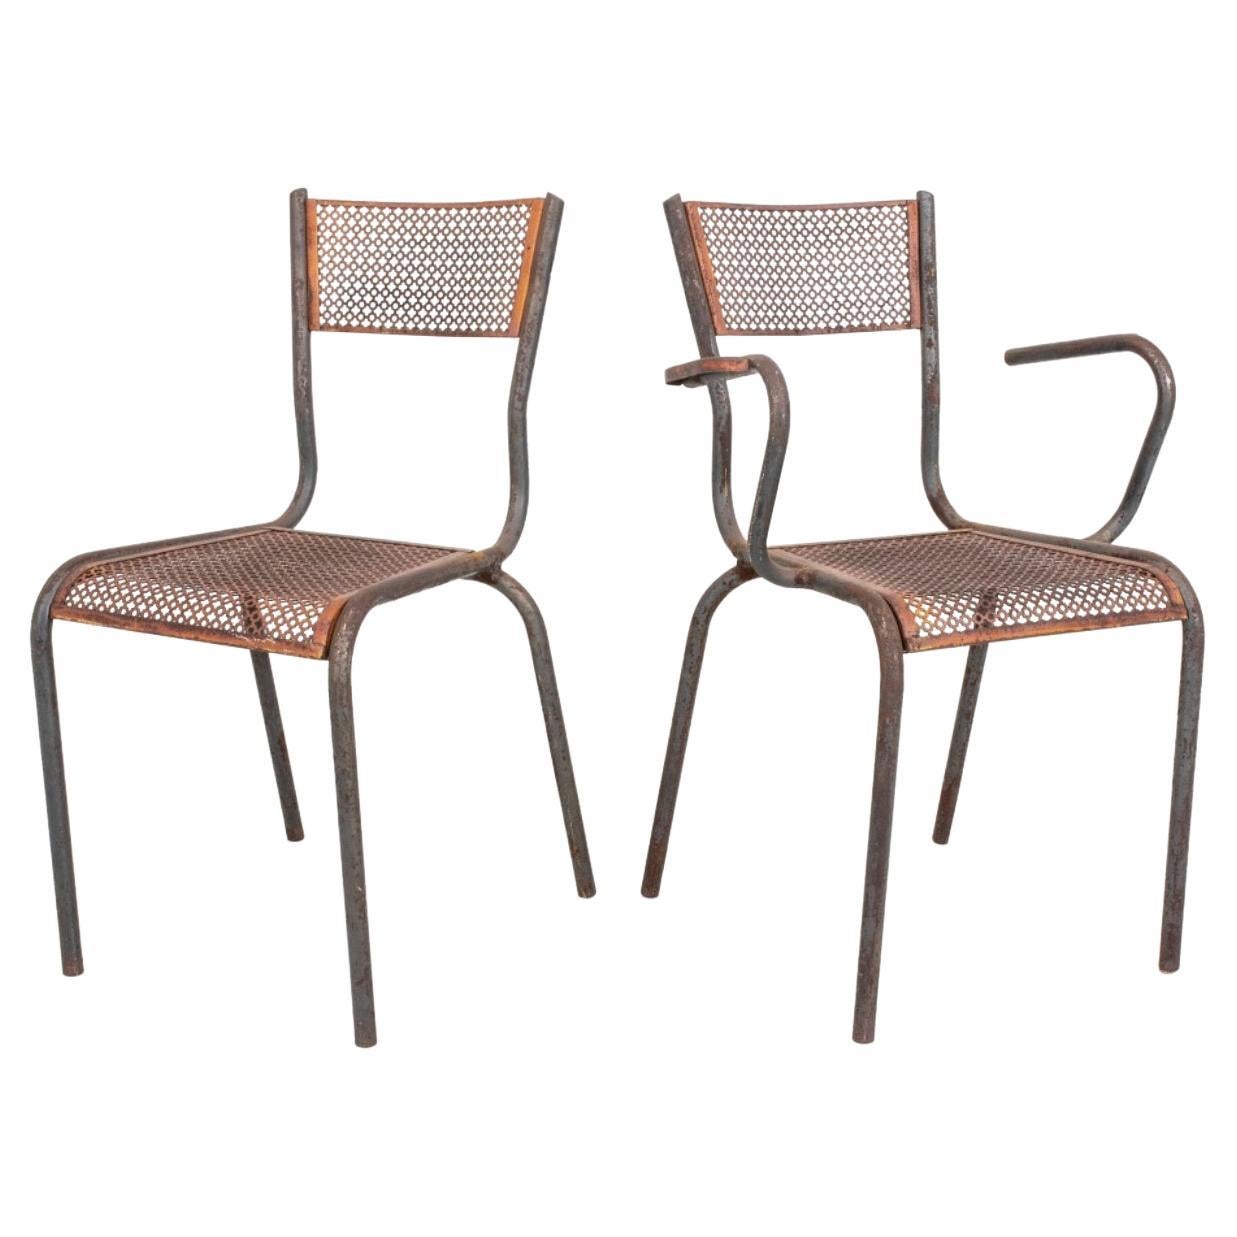 Mathieu Mategot French Modernist Side Chairs, Pair For Sale